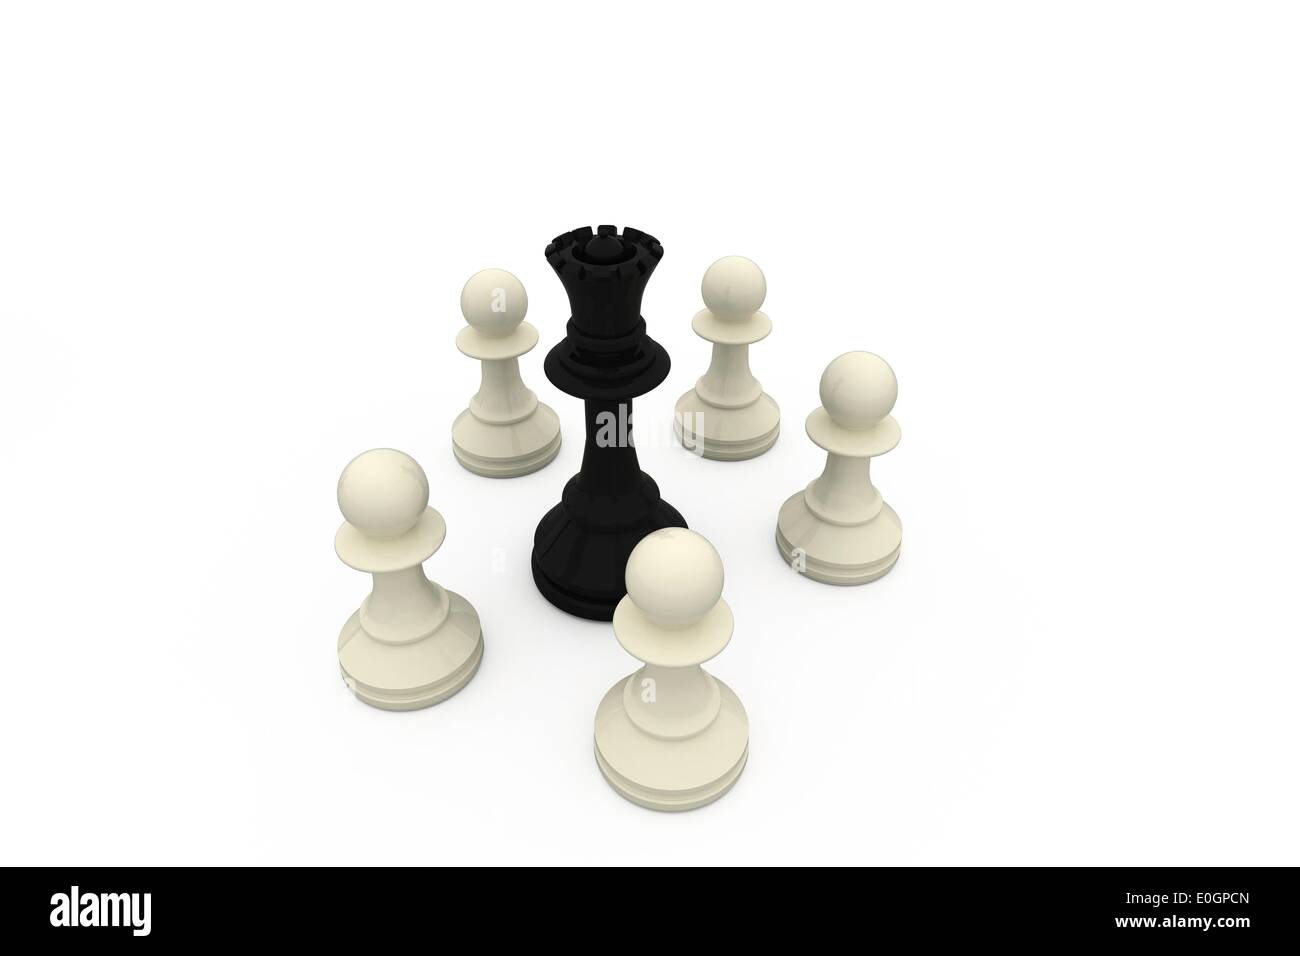 able-hedgehog44: white chess king, black pawns, topped with cross